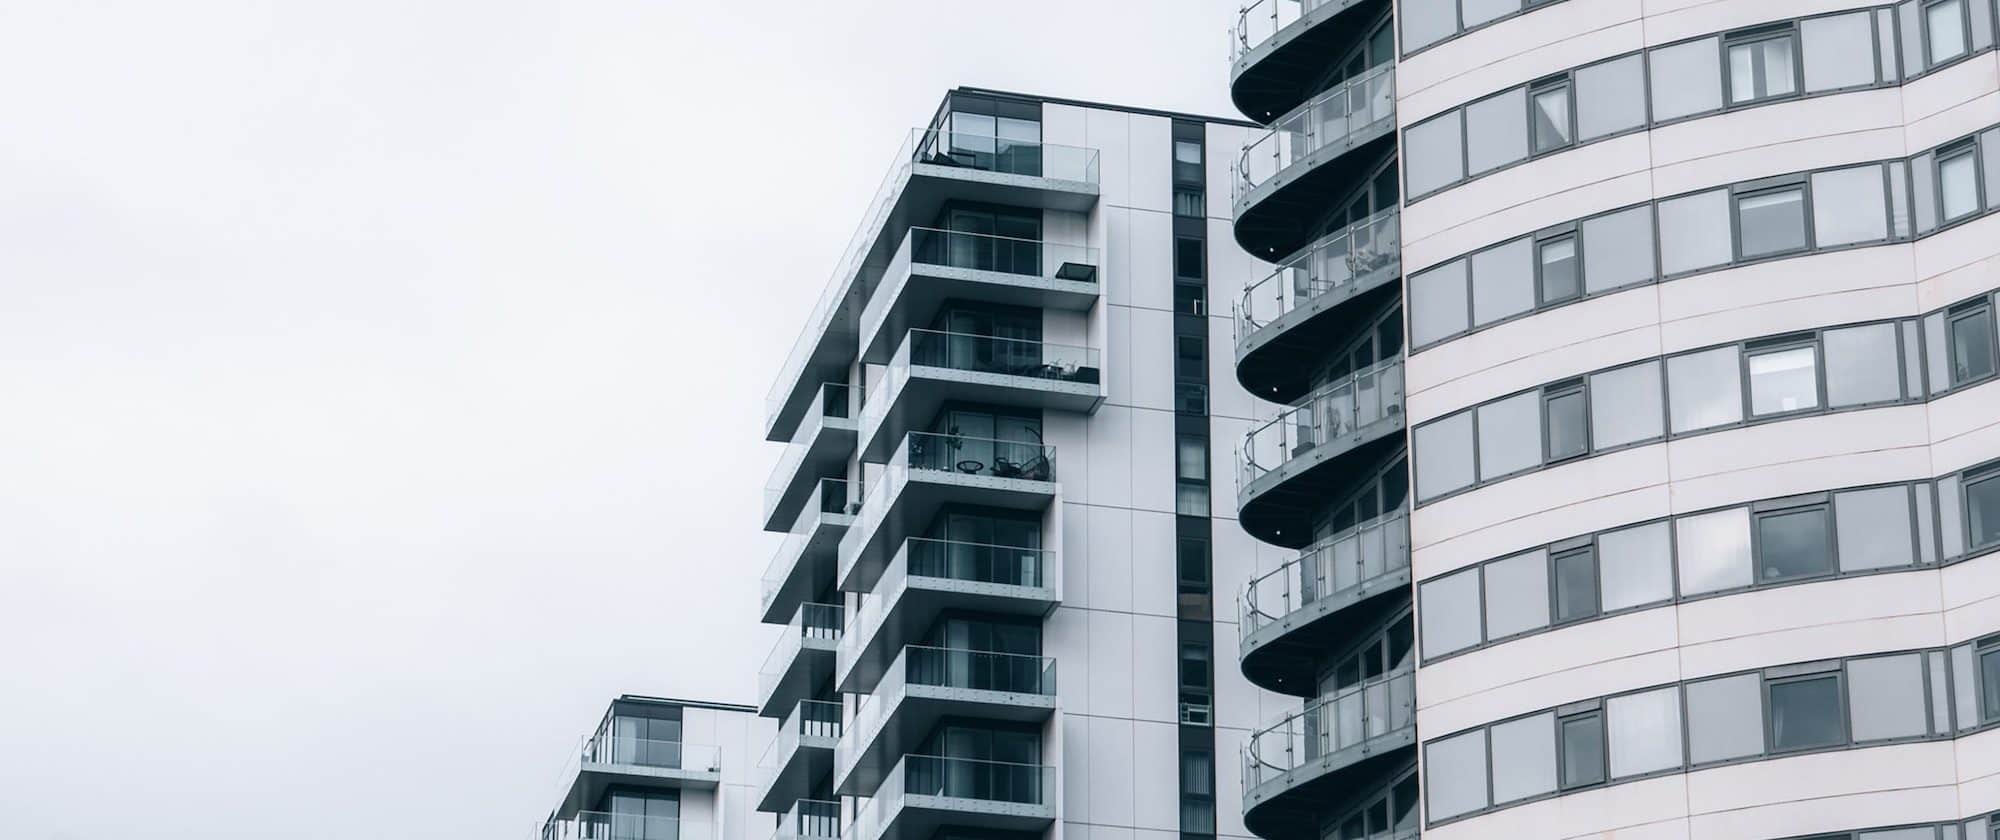 Do I Need Building Insurance for a Leasehold Flat?